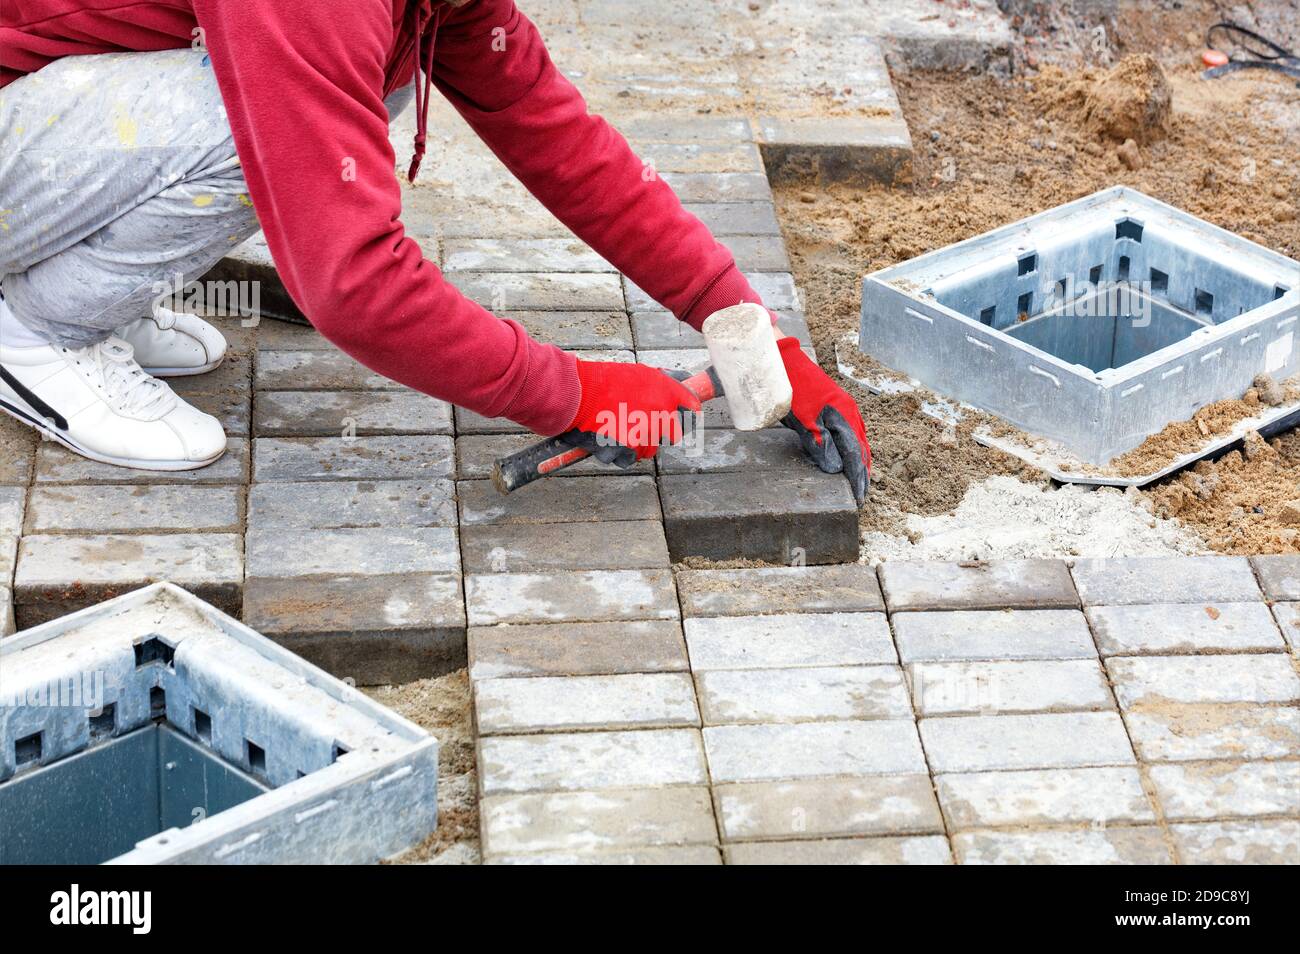 A worker lays down paving slabs and places them on prepared flat sandy soil on the sidewalk around utility hatches, copy space.. Stock Photo